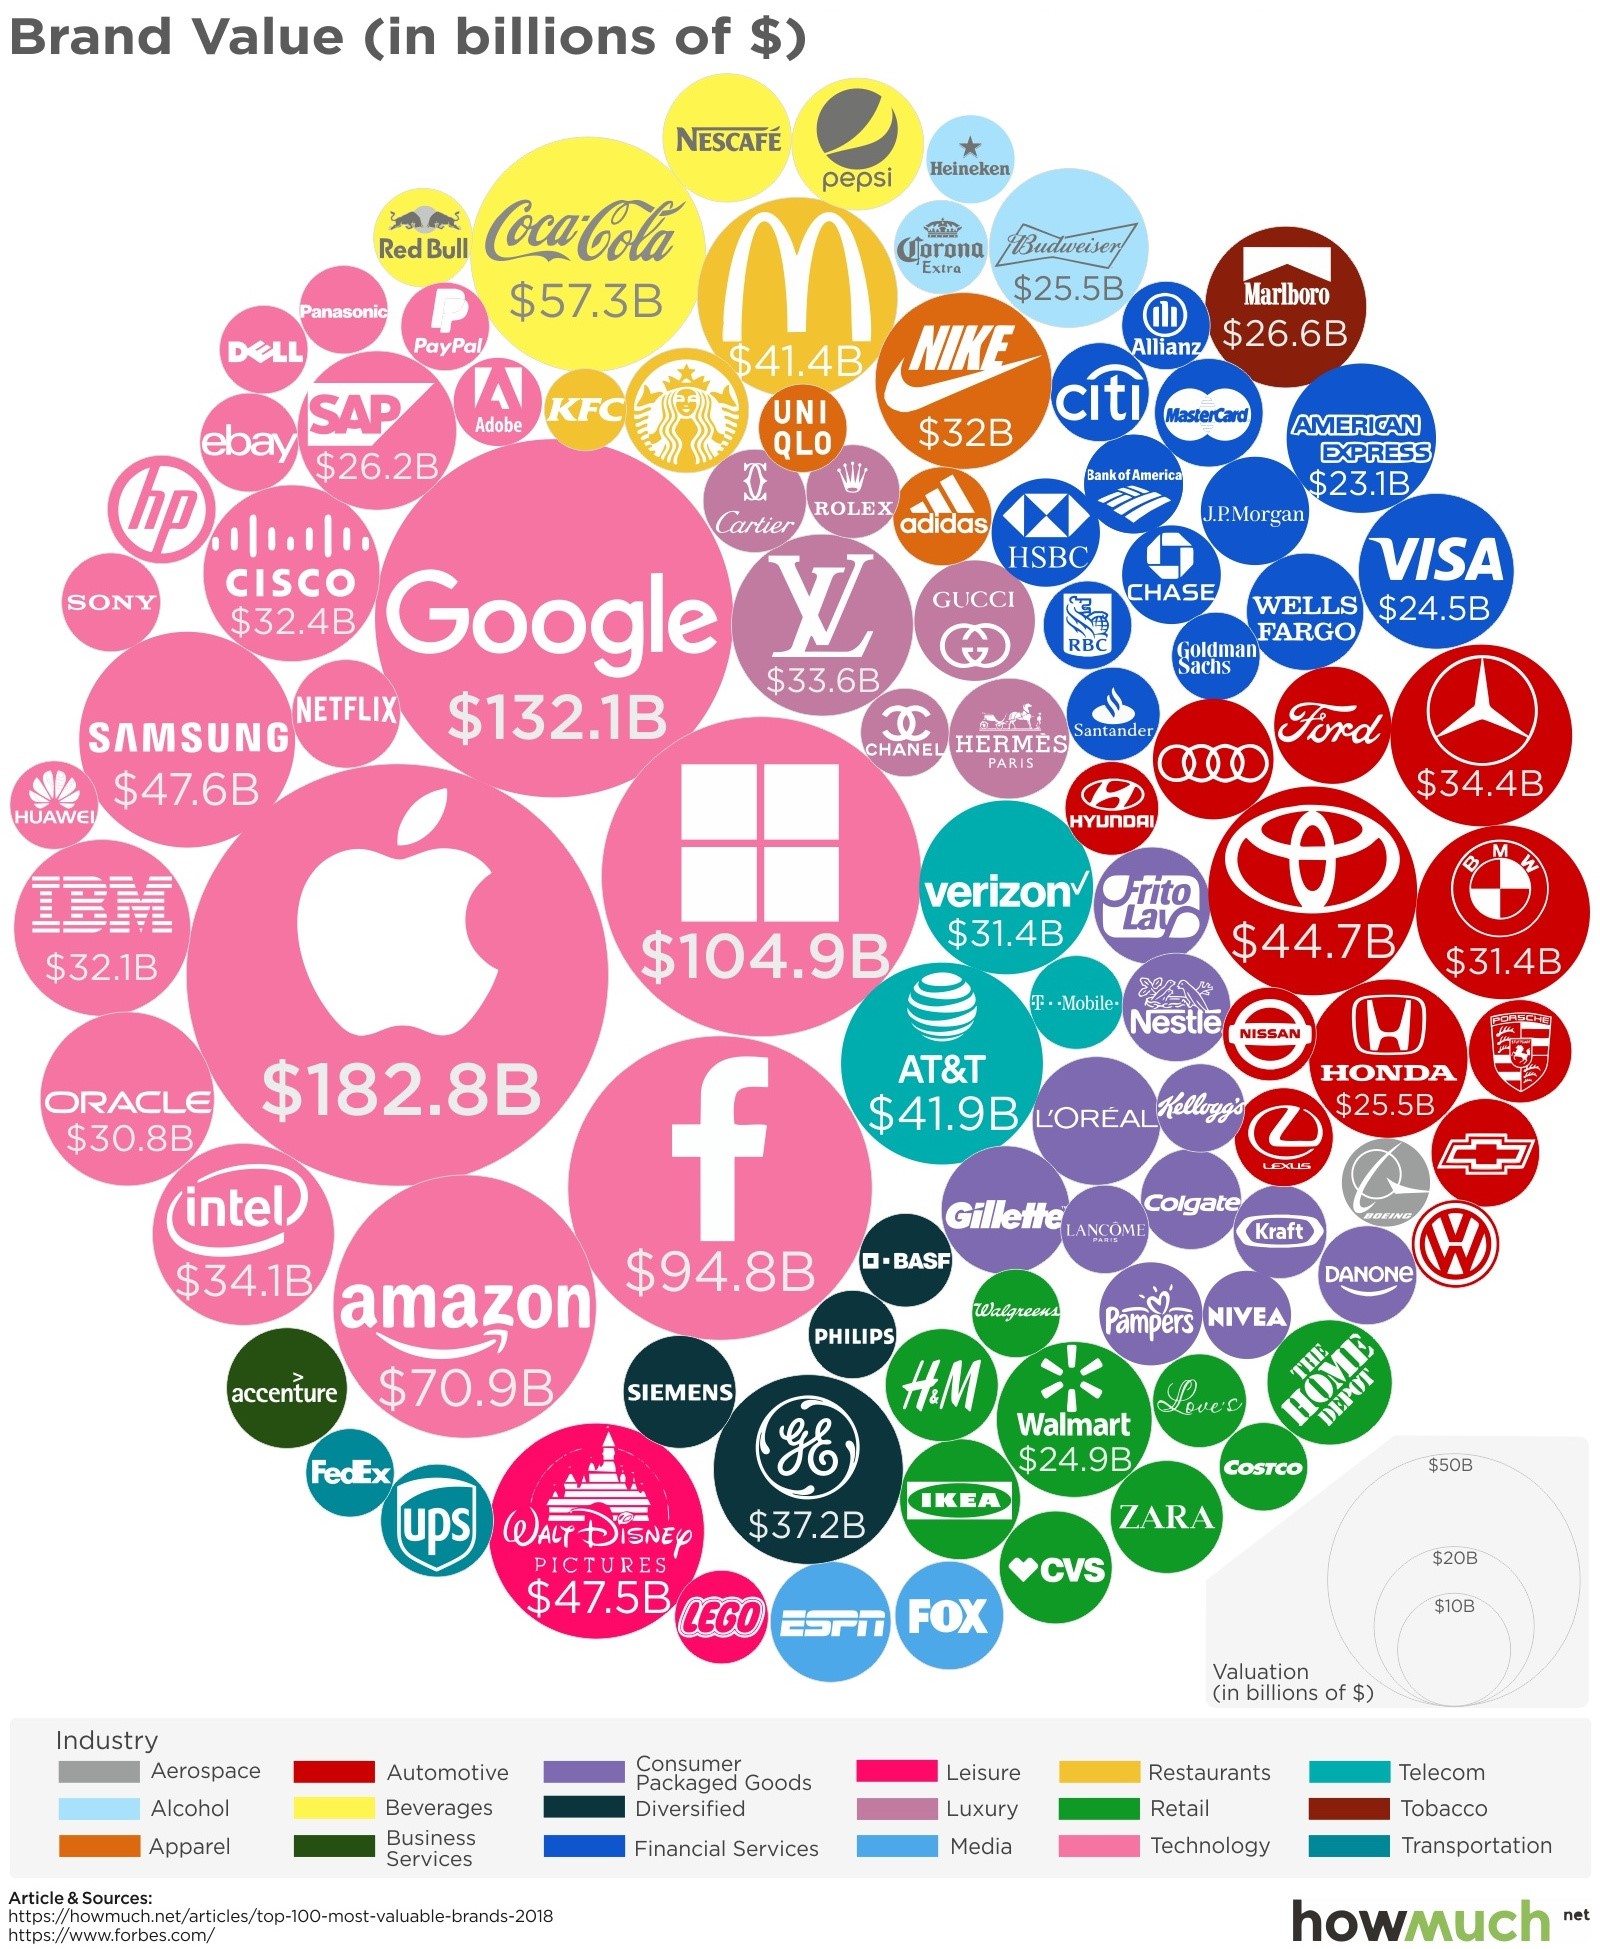 The World’s 100 Most Valuable Brands in 2018